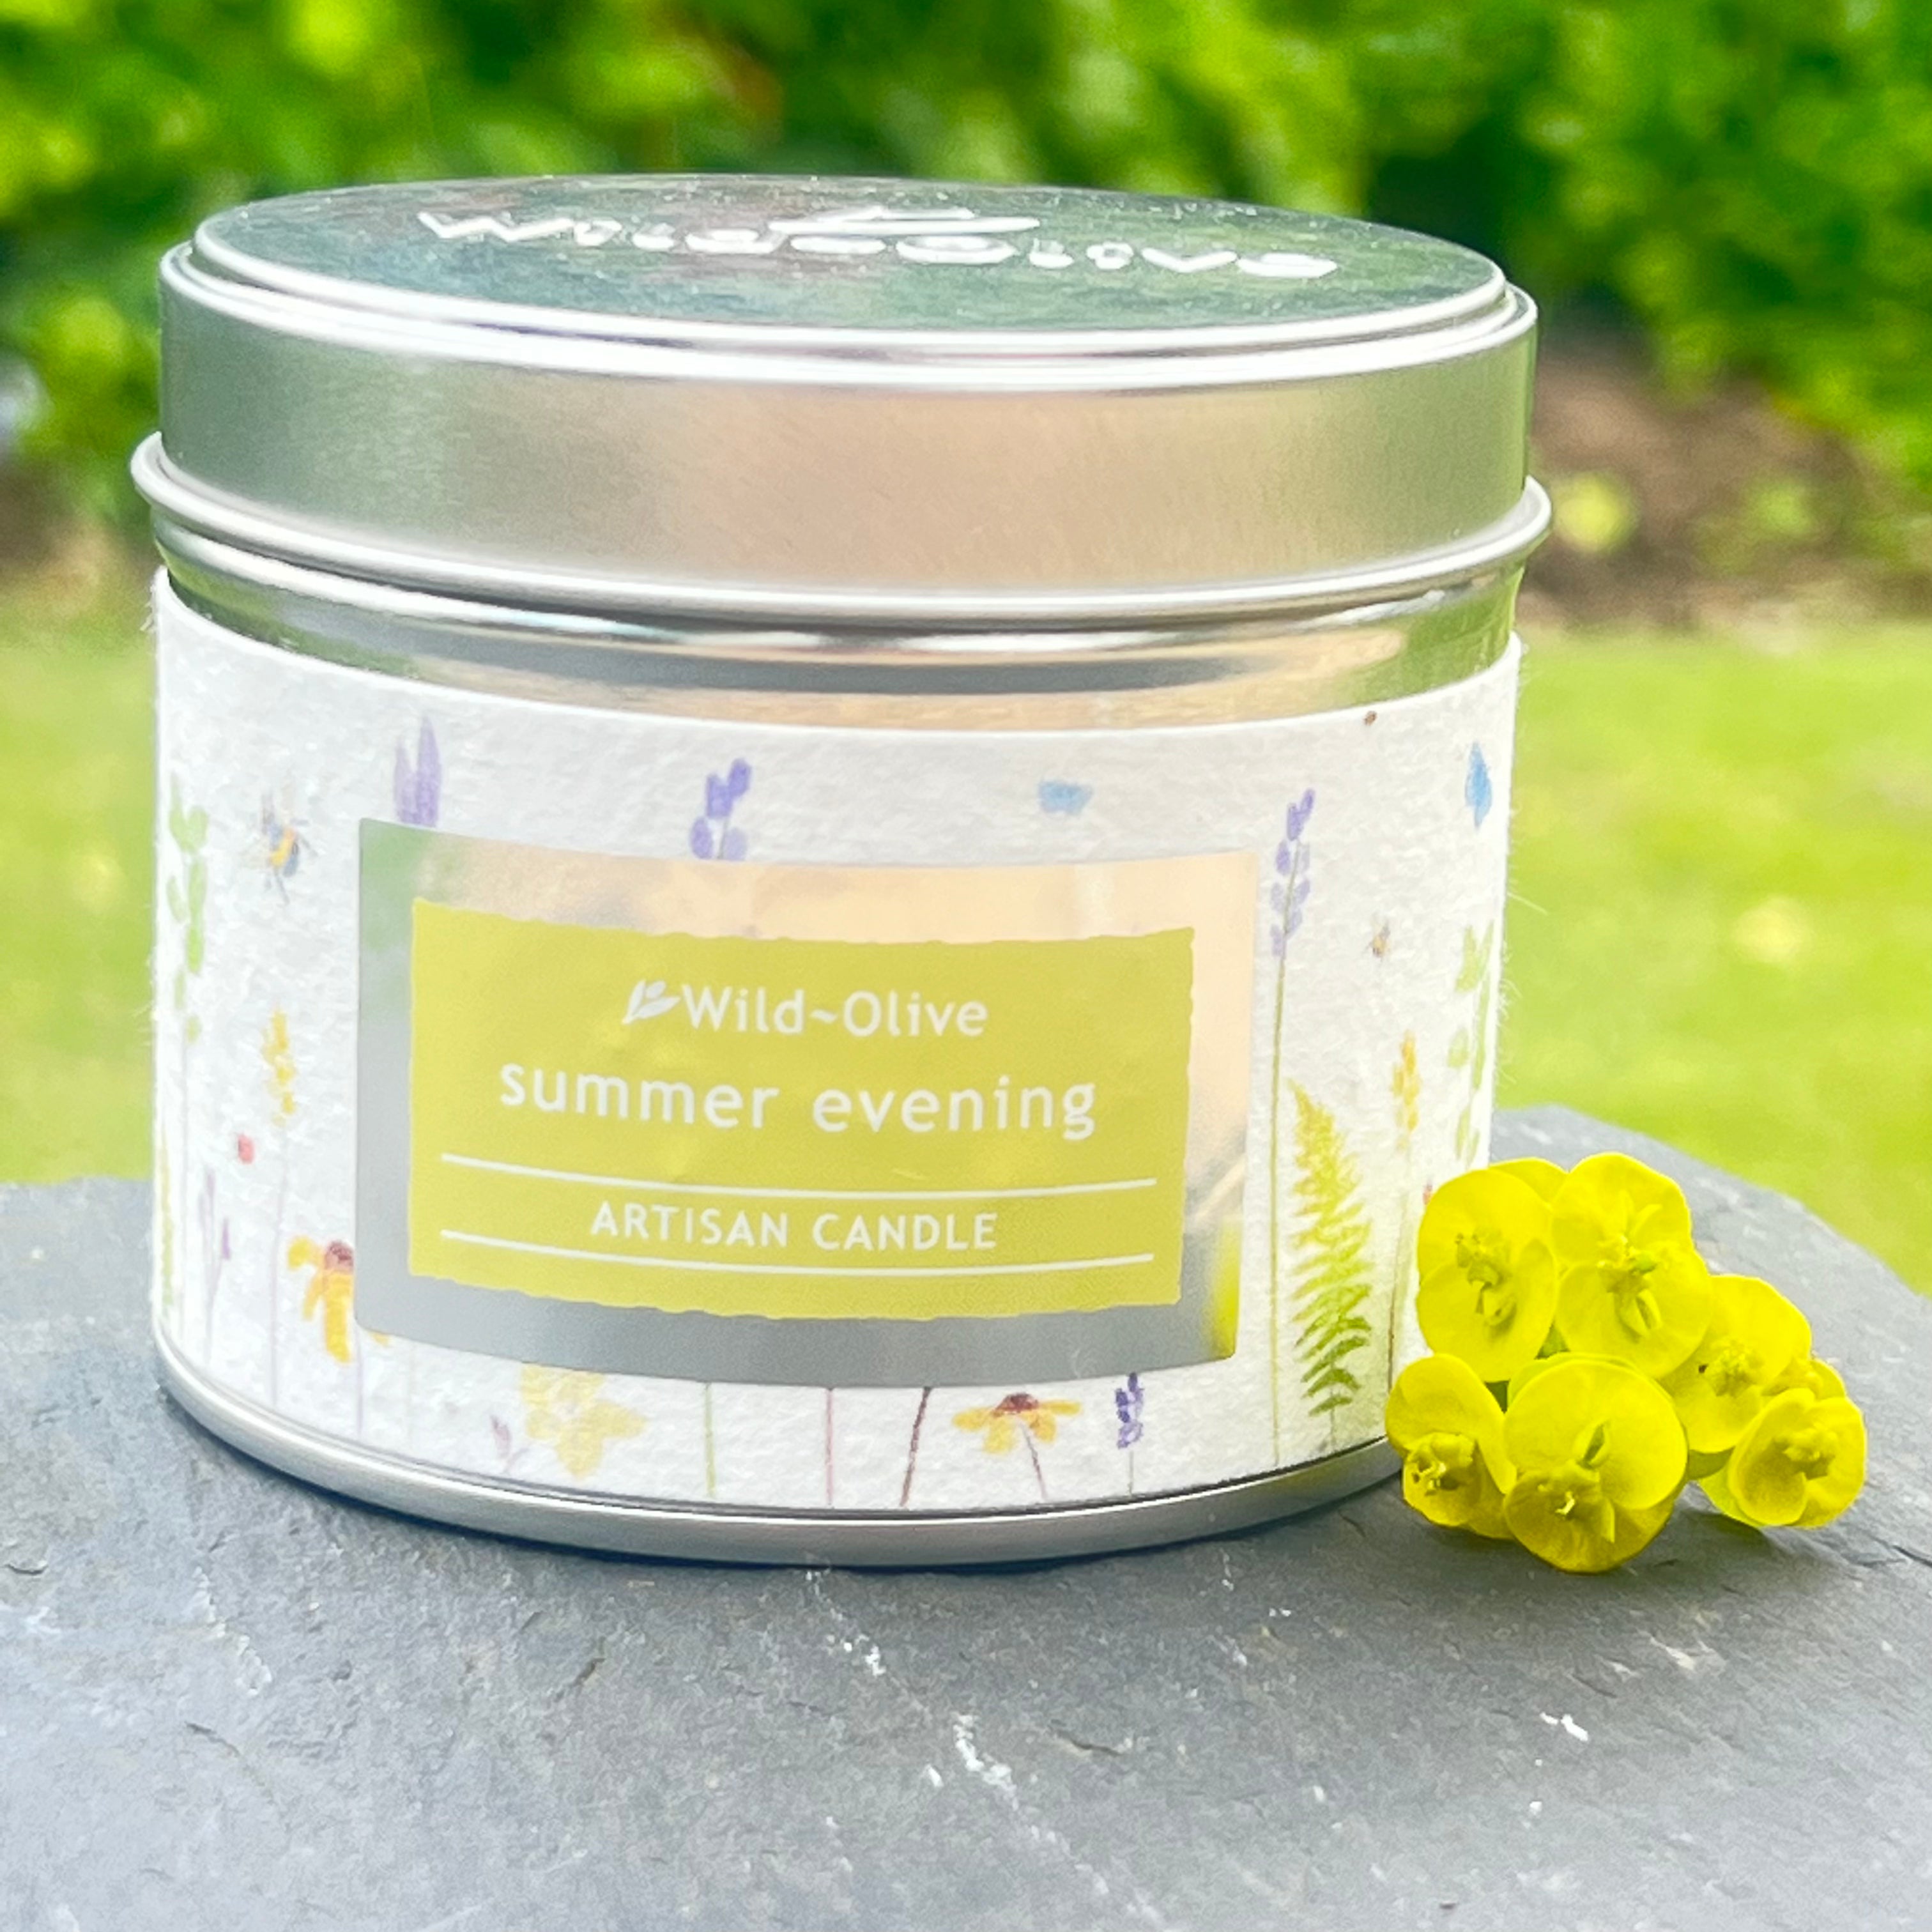 Wild Olive Summer Evening Artisan Candle